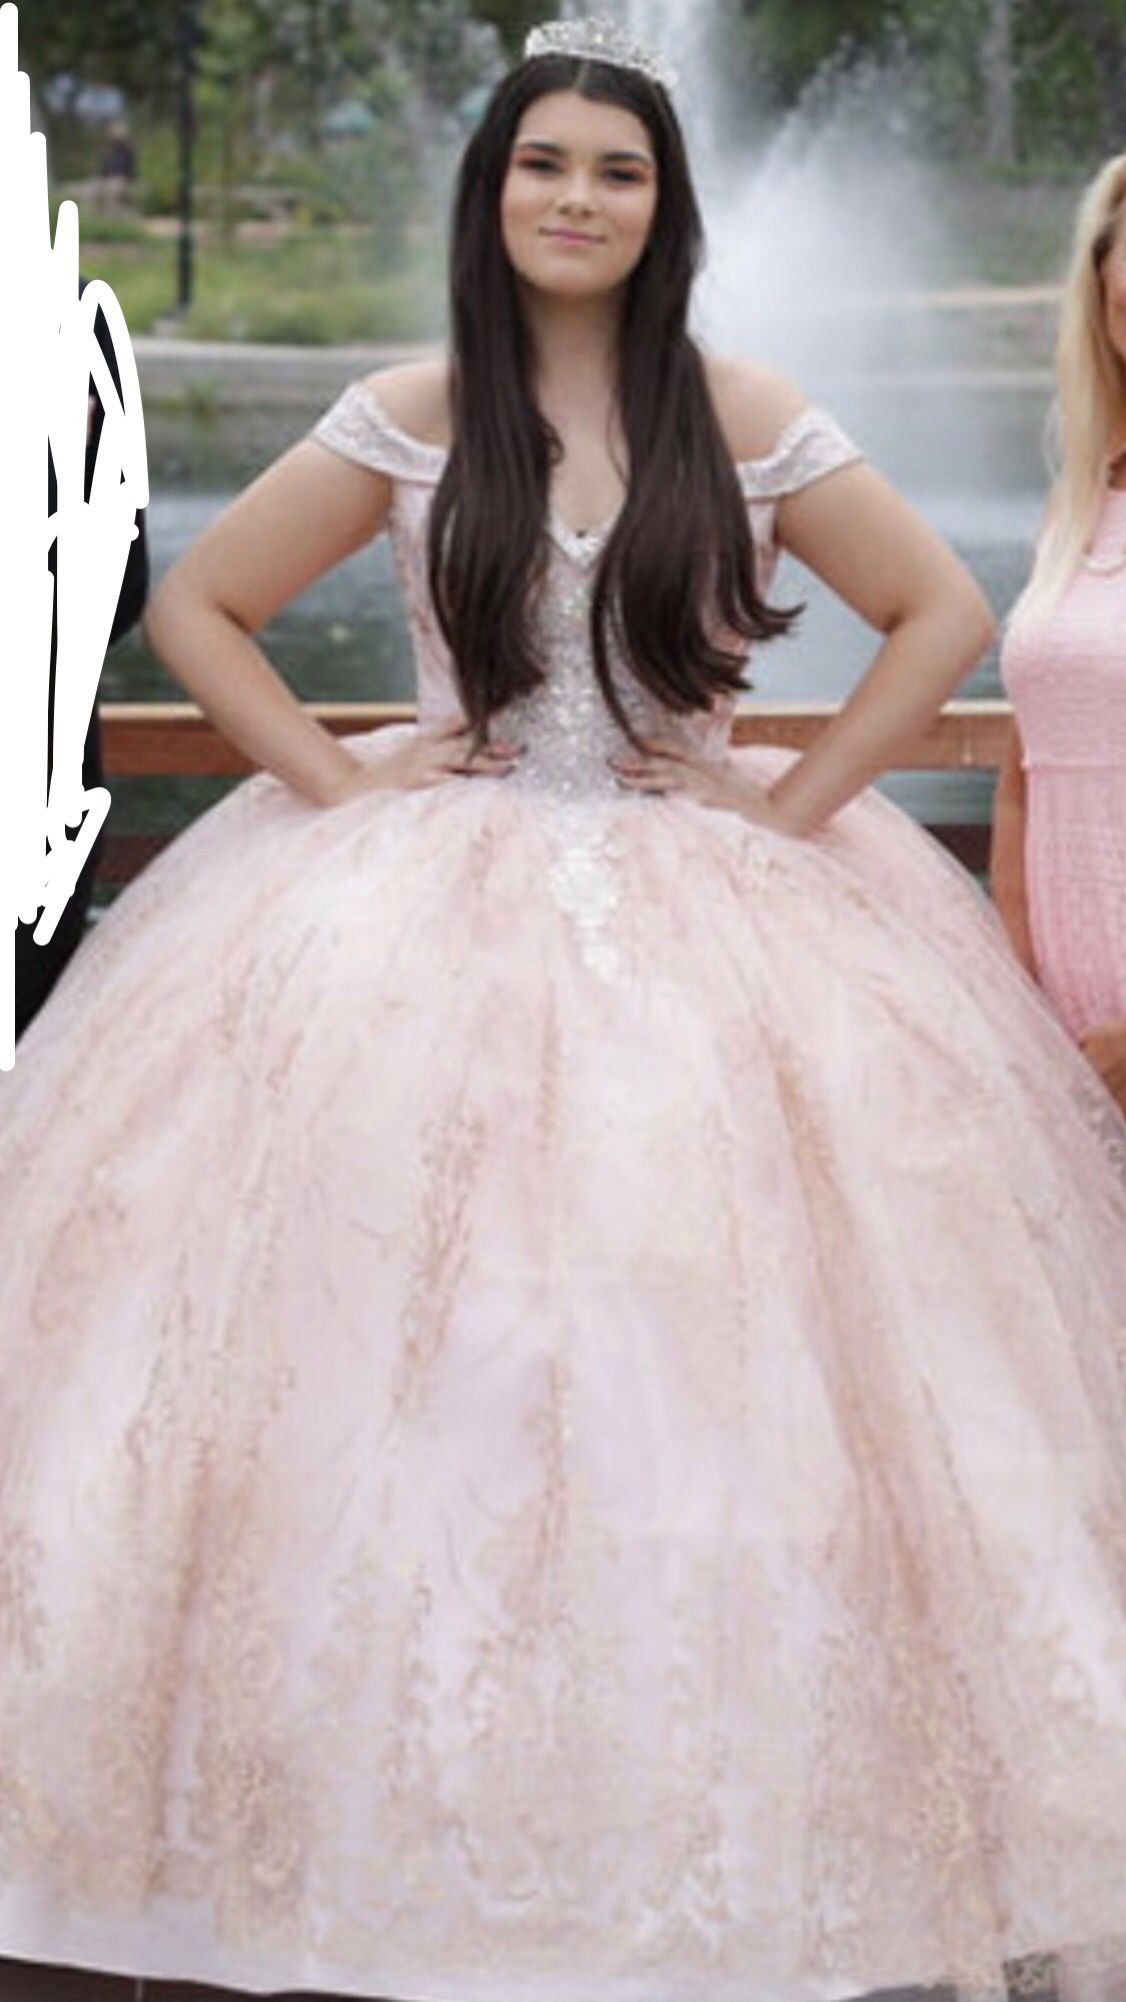 Baby Pink Quince Dress With Petti Coat And Tiara ! Only Worn For An Hour For Photo Op ! So It’s Brand New ! 